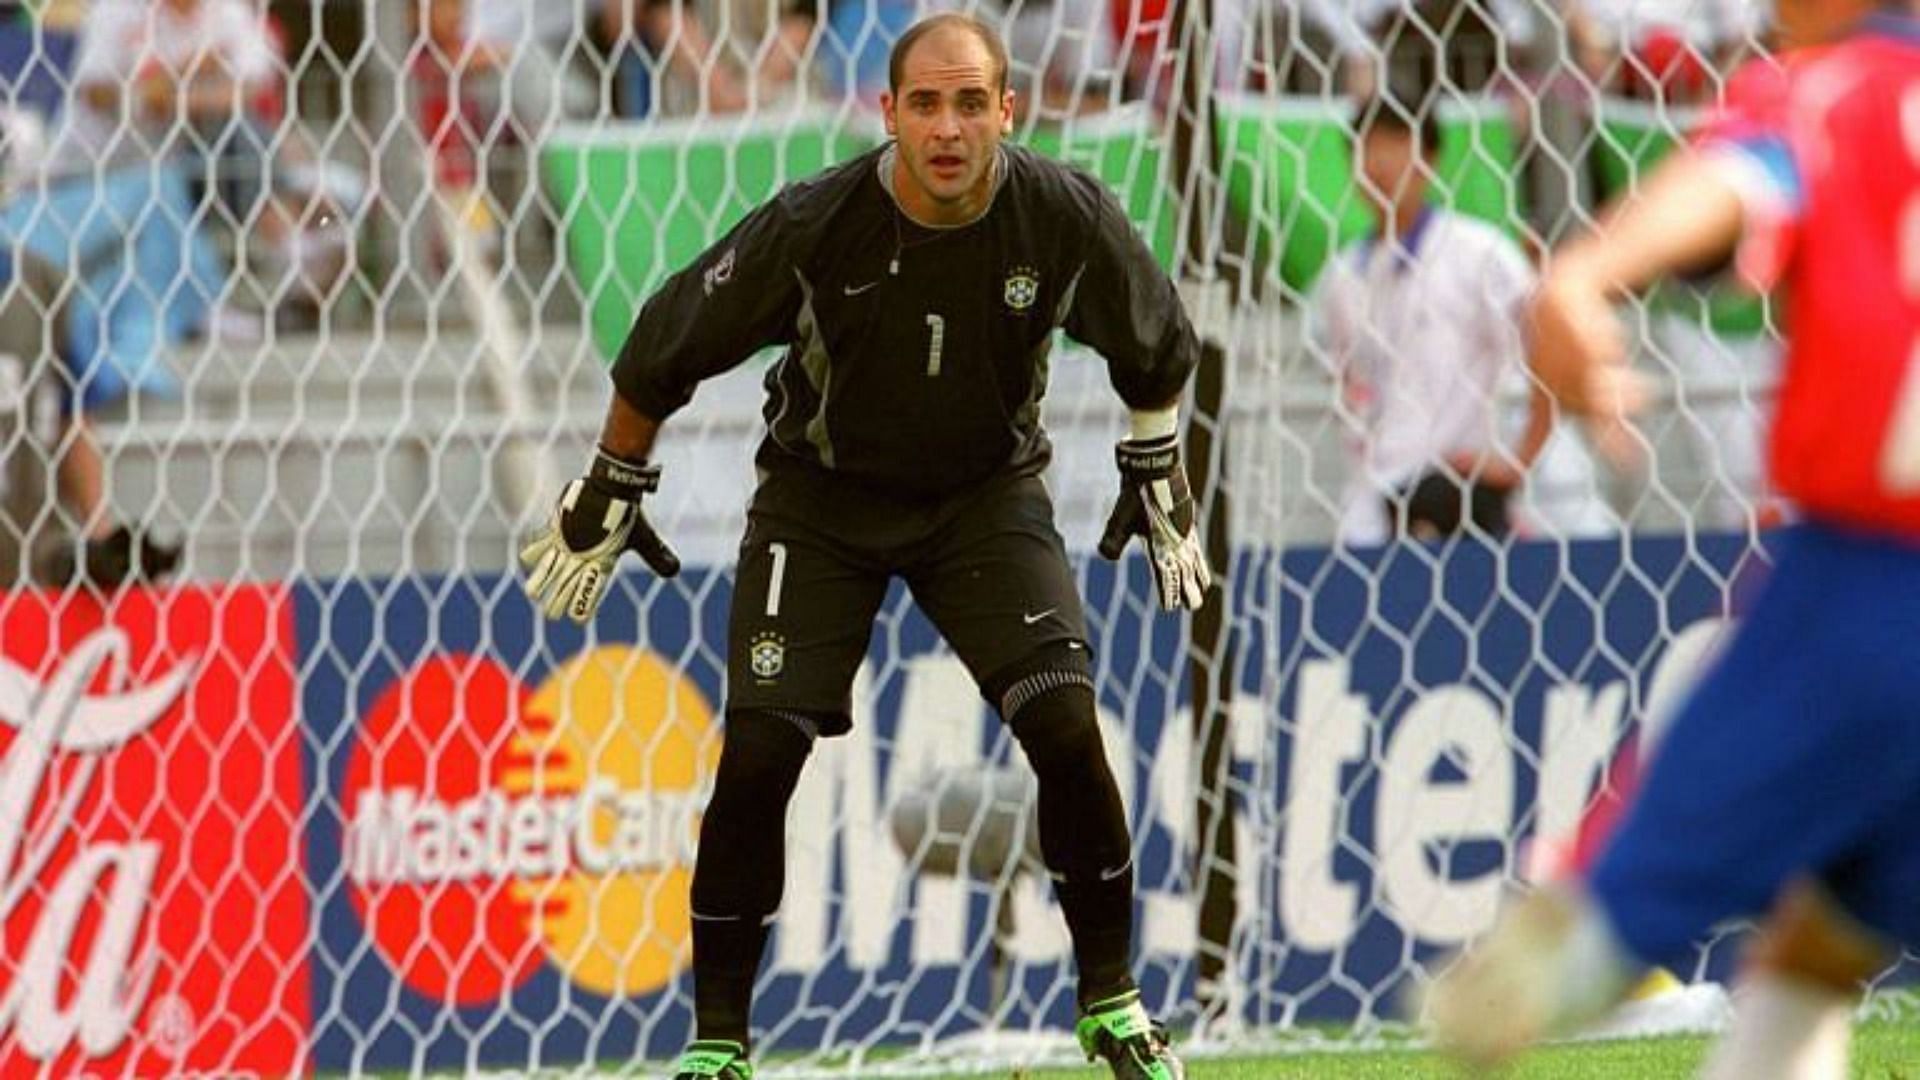 Marcos was a legendary shot-stopper for the 2002 World Cup winning team. 